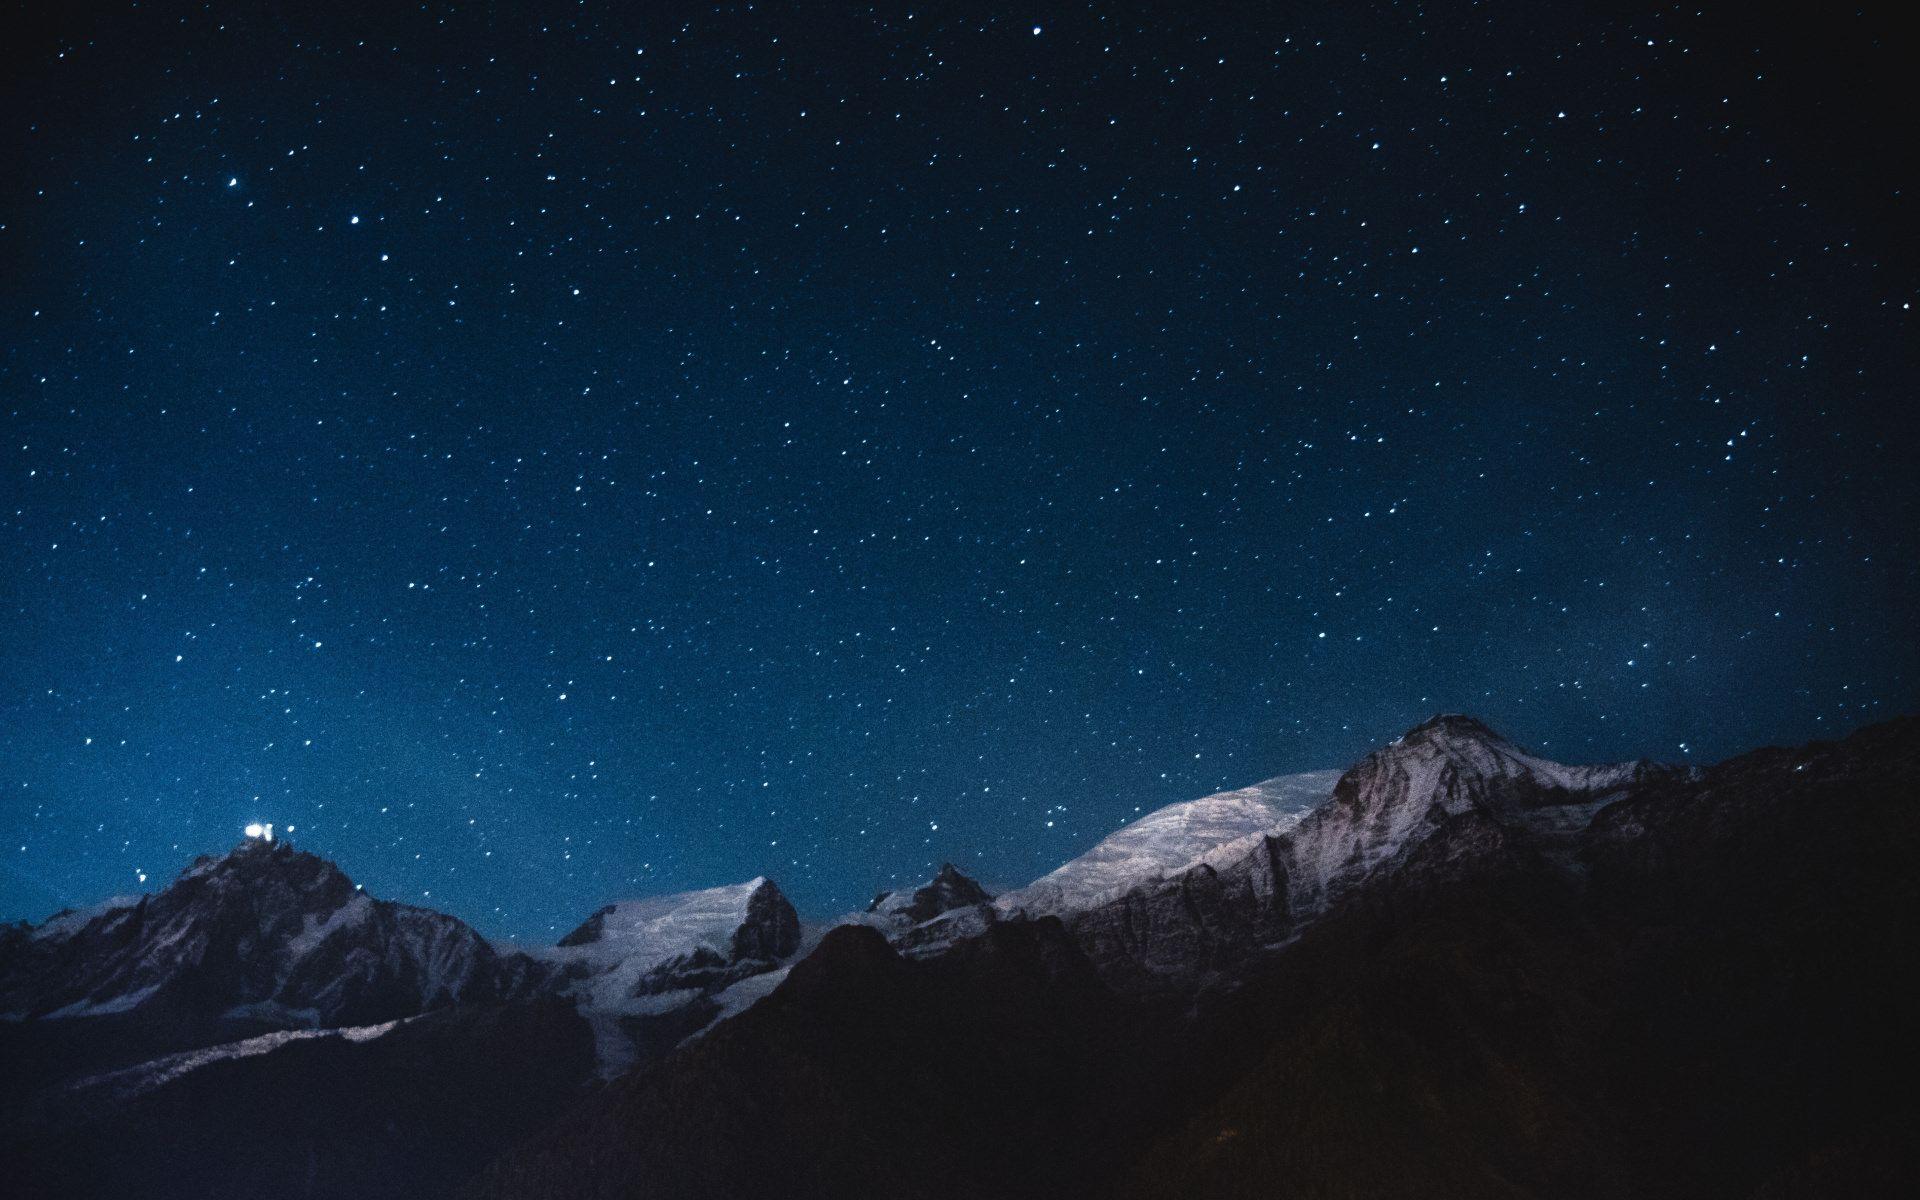 Night Mountains Wallpapers - Wallpaper Cave